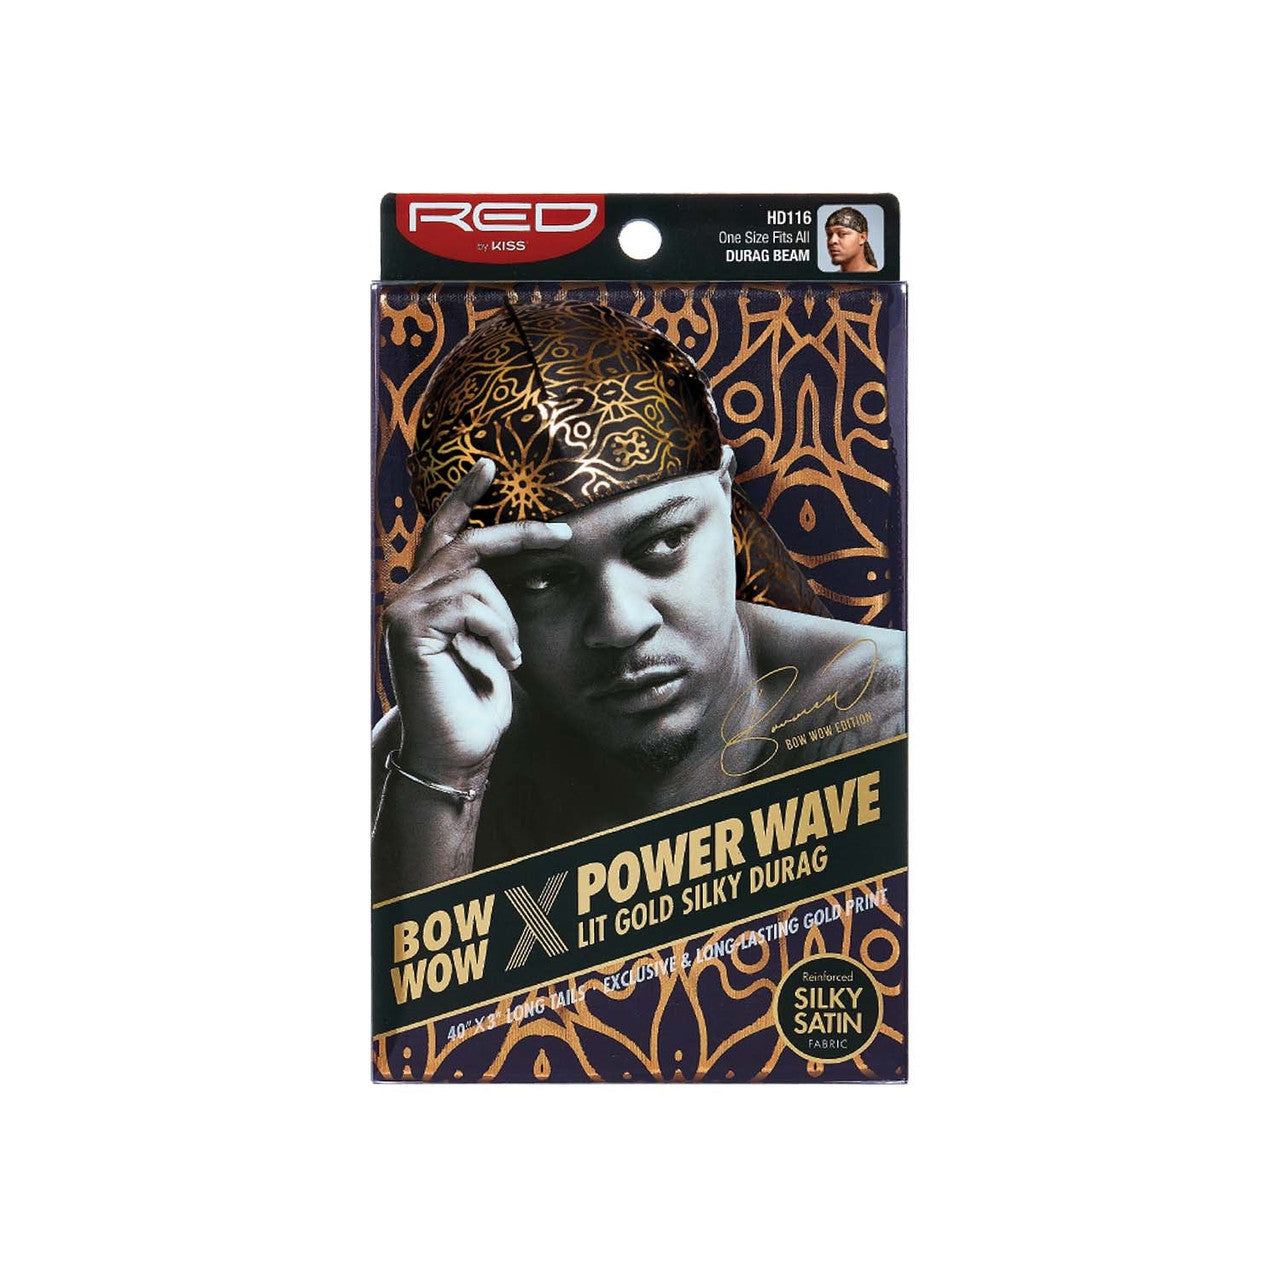 Red by Kiss Bow Wow X Power Wave Lit Gold Silky Durag - Durag Beam - #HD116